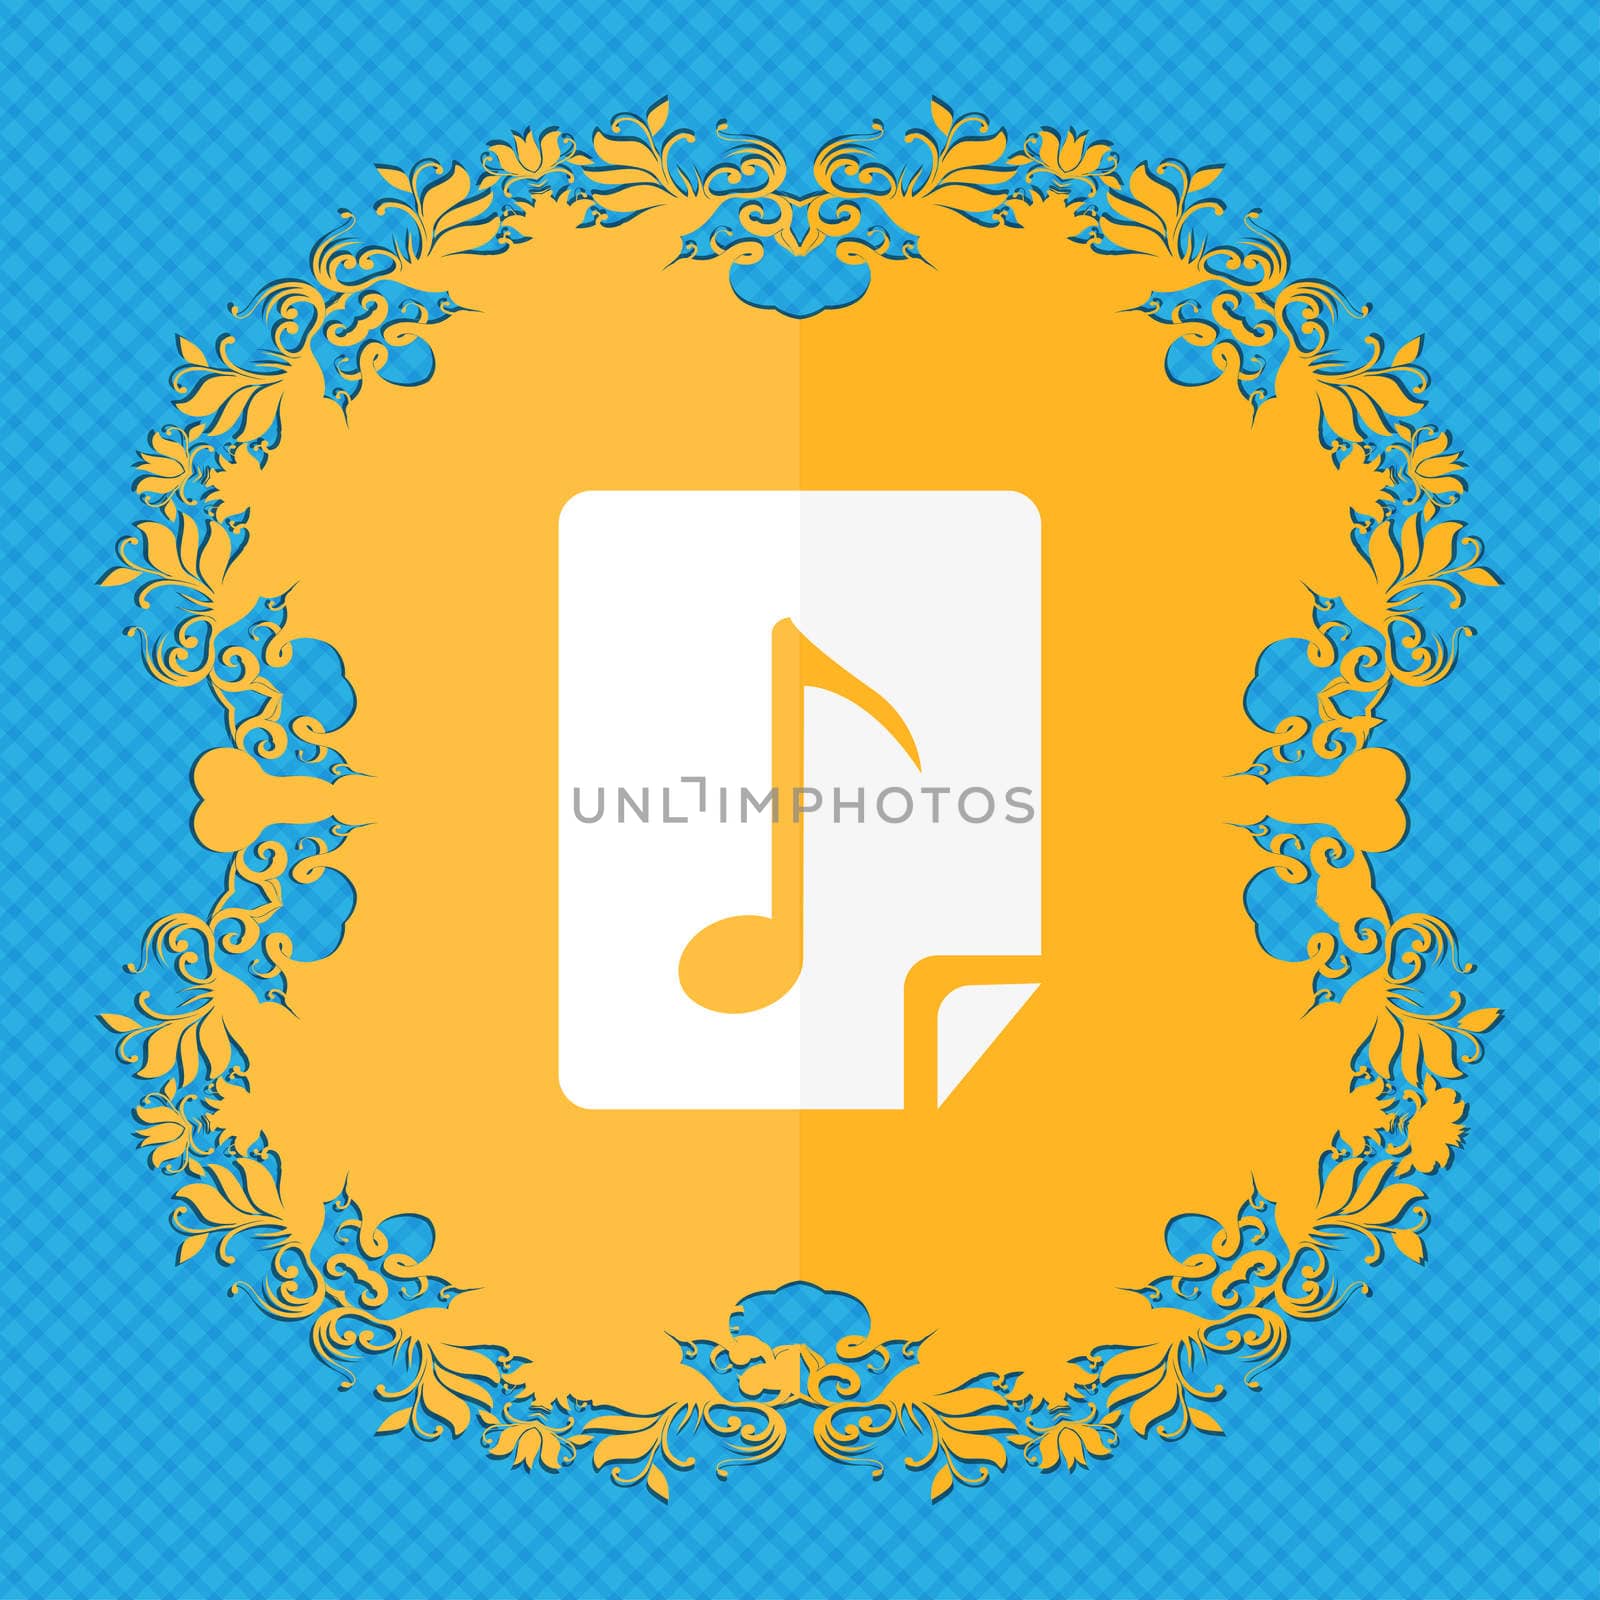 Audio, MP3 file icon sign. Floral flat design on a blue abstract background with place for your text.  by serhii_lohvyniuk